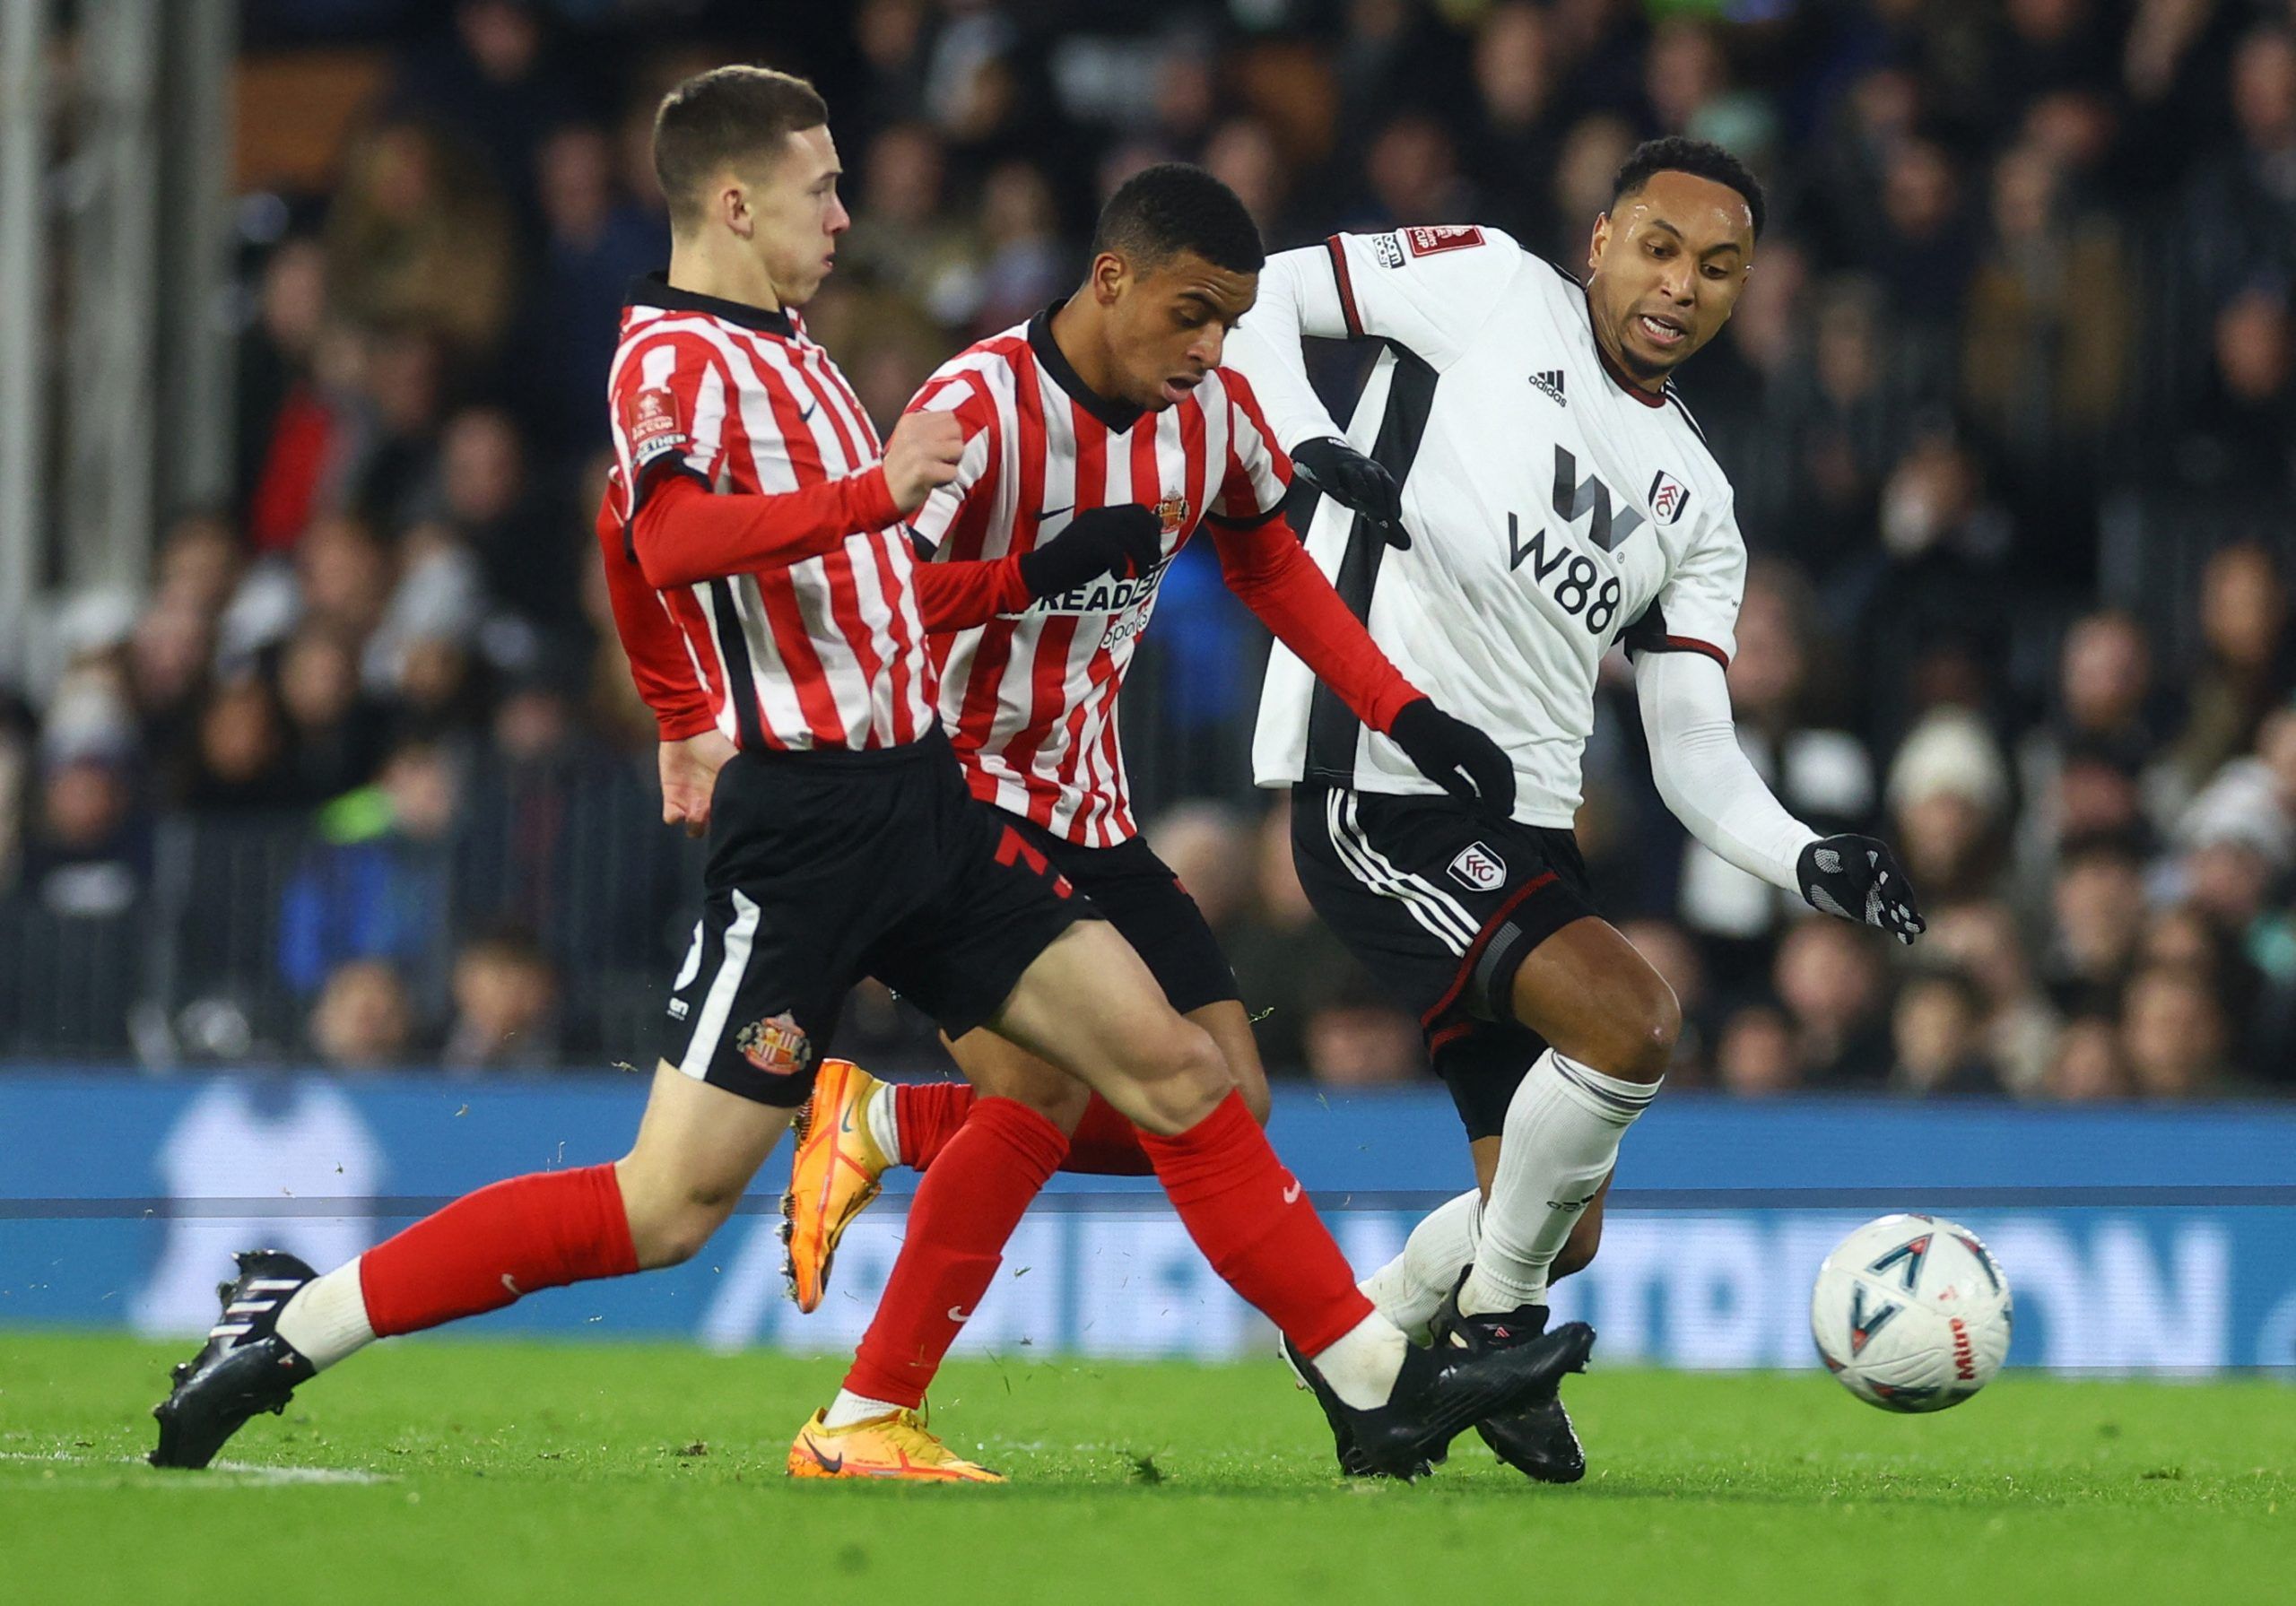 Soccer Football - FA Cup - Fourth Round - Fulham v Sunderland - Craven Cottage, London, Britain - January 28, 2023 Sunderland's Jewison Bennette in action with Fulham's Kenny Tete Action Images via Reuters/Paul Childs